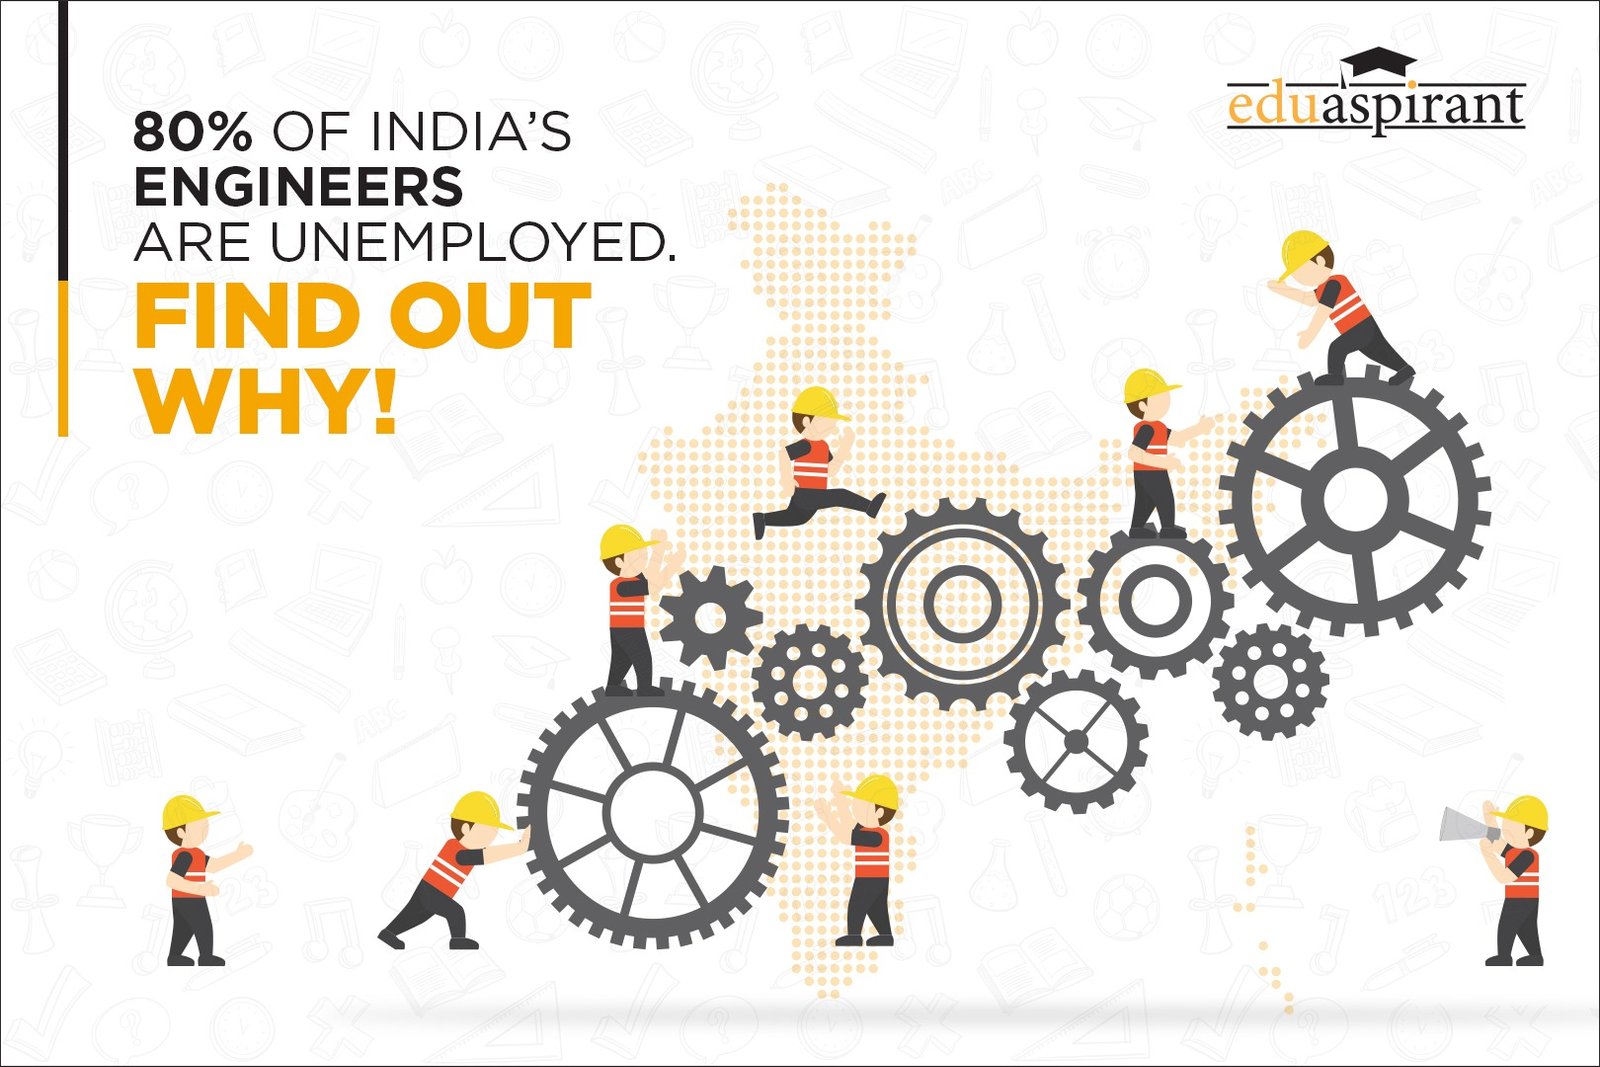 80% Unemployed Engineers in India – Where is the Gap?